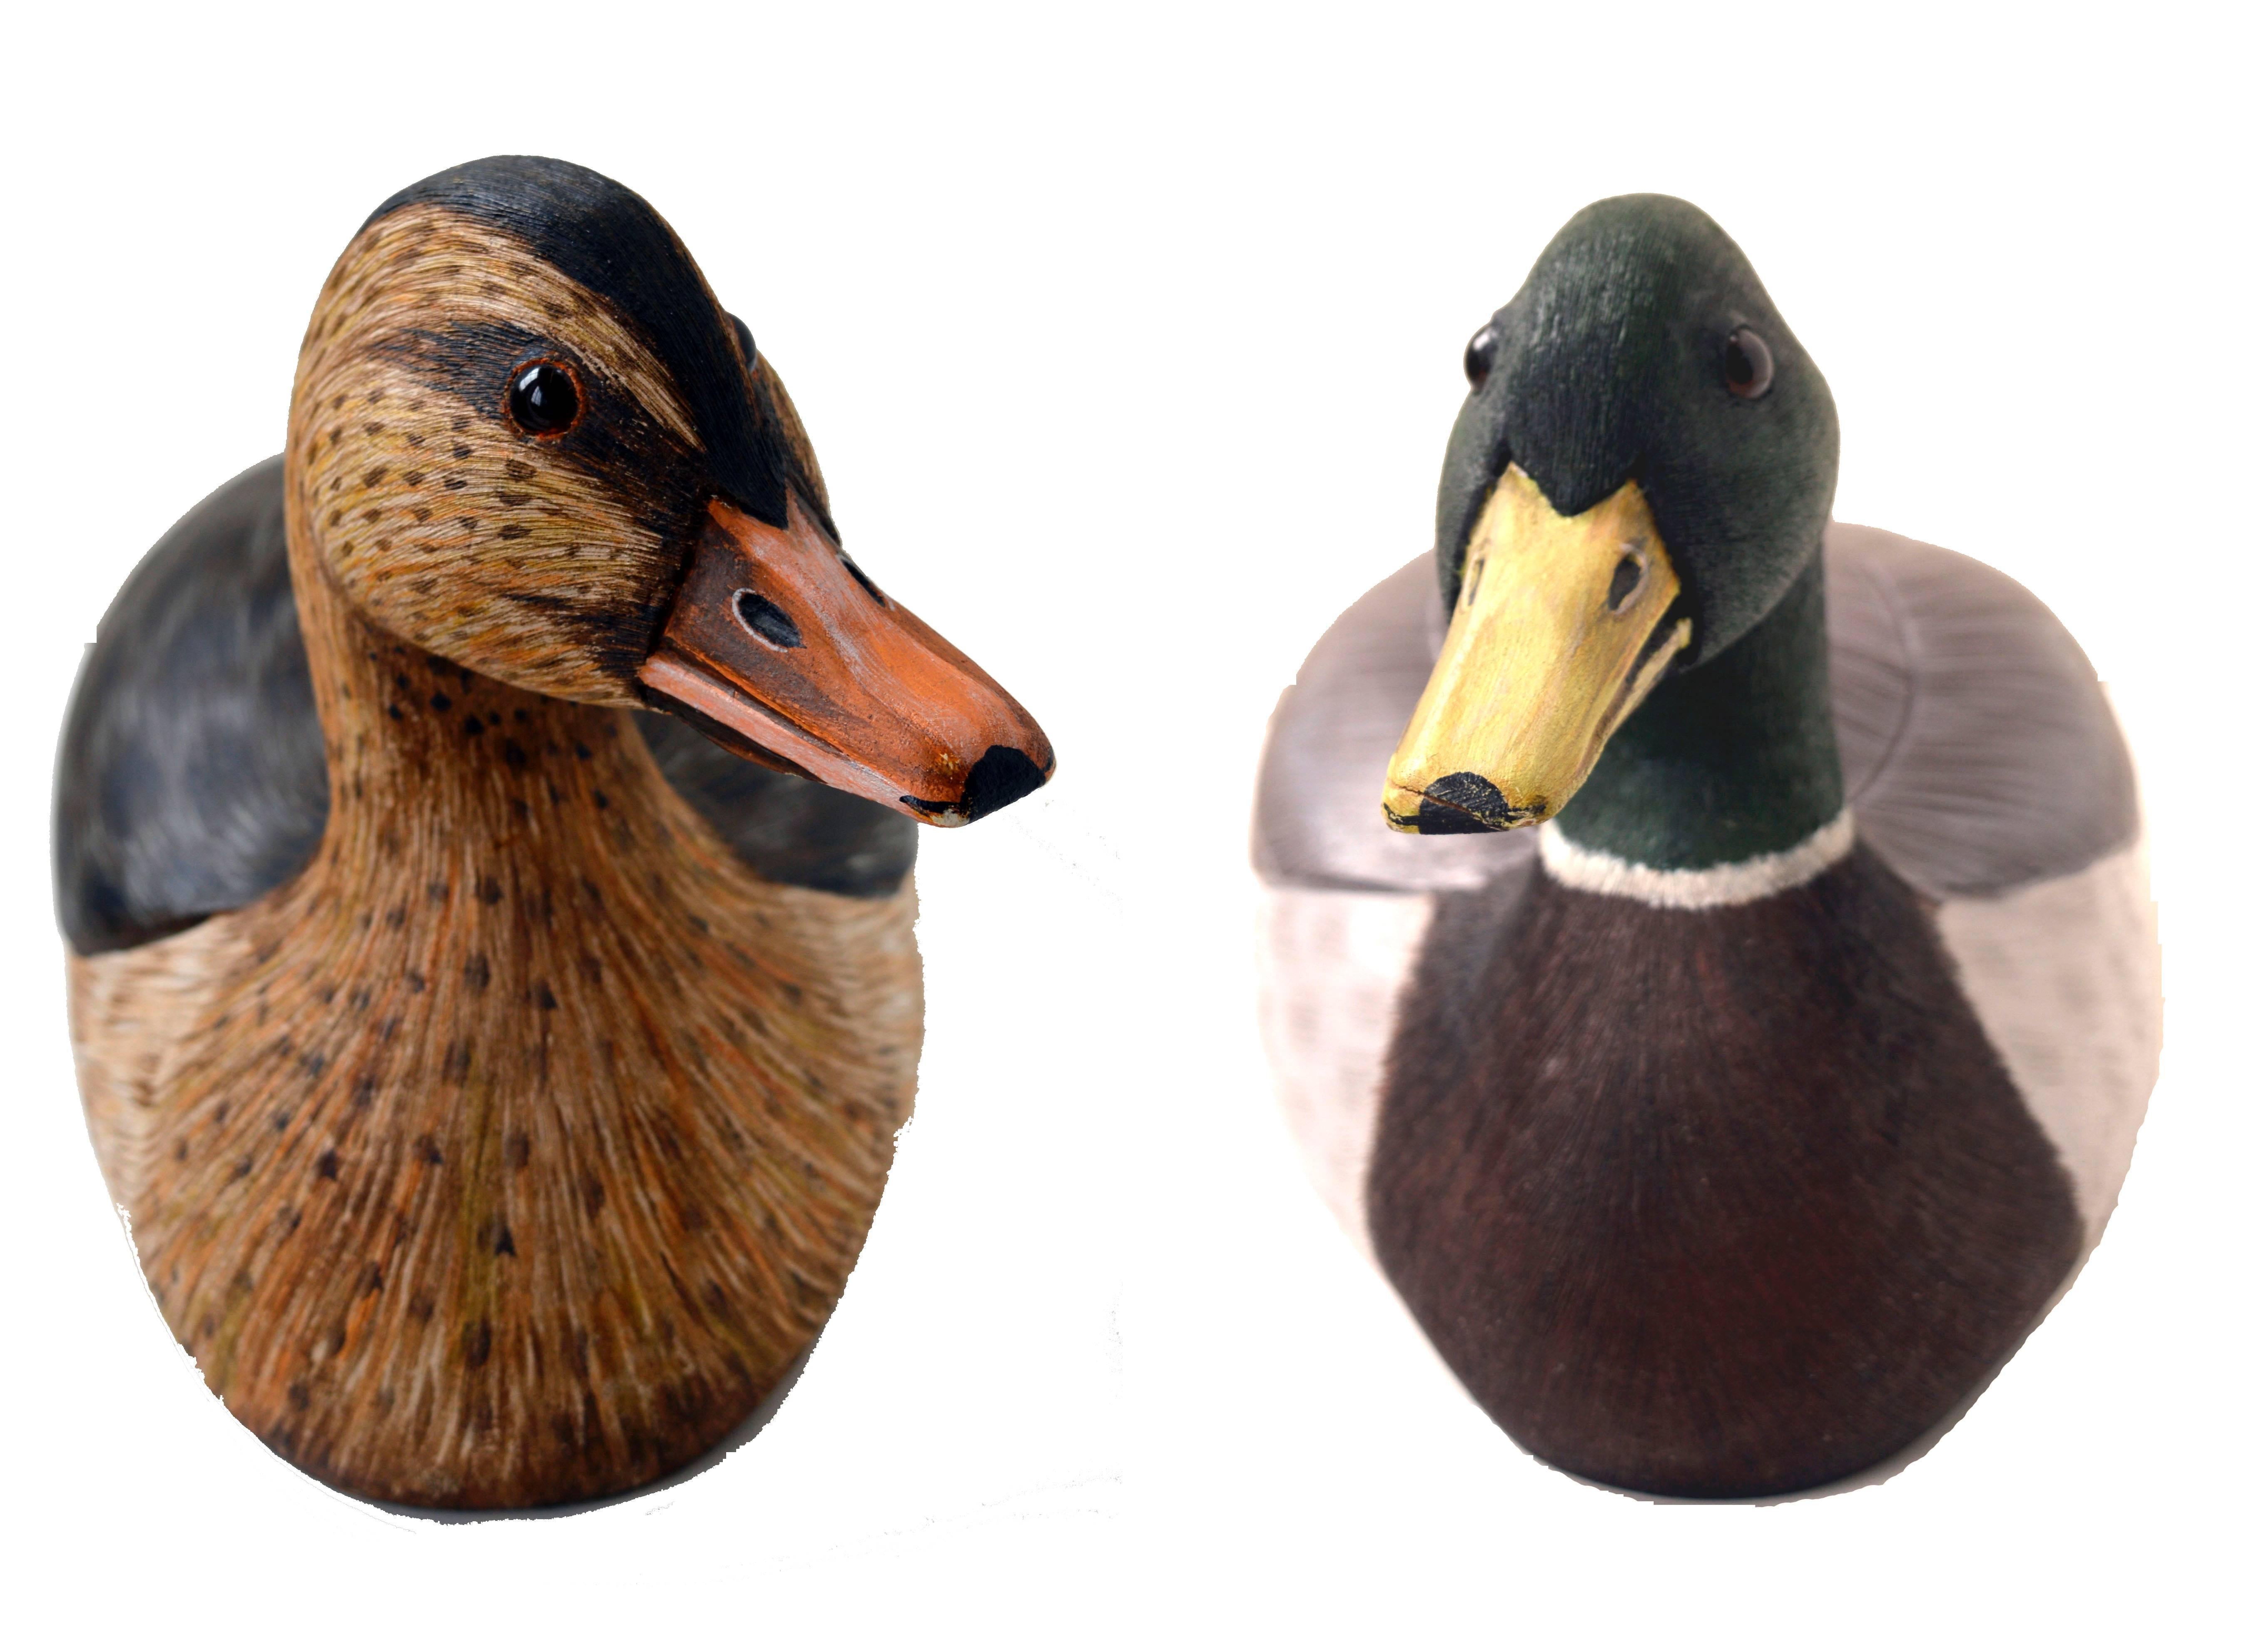 An excellent example of a fine hand-carved duck decoy craftsman created pair of Mallards. The artists name is not yet determined 